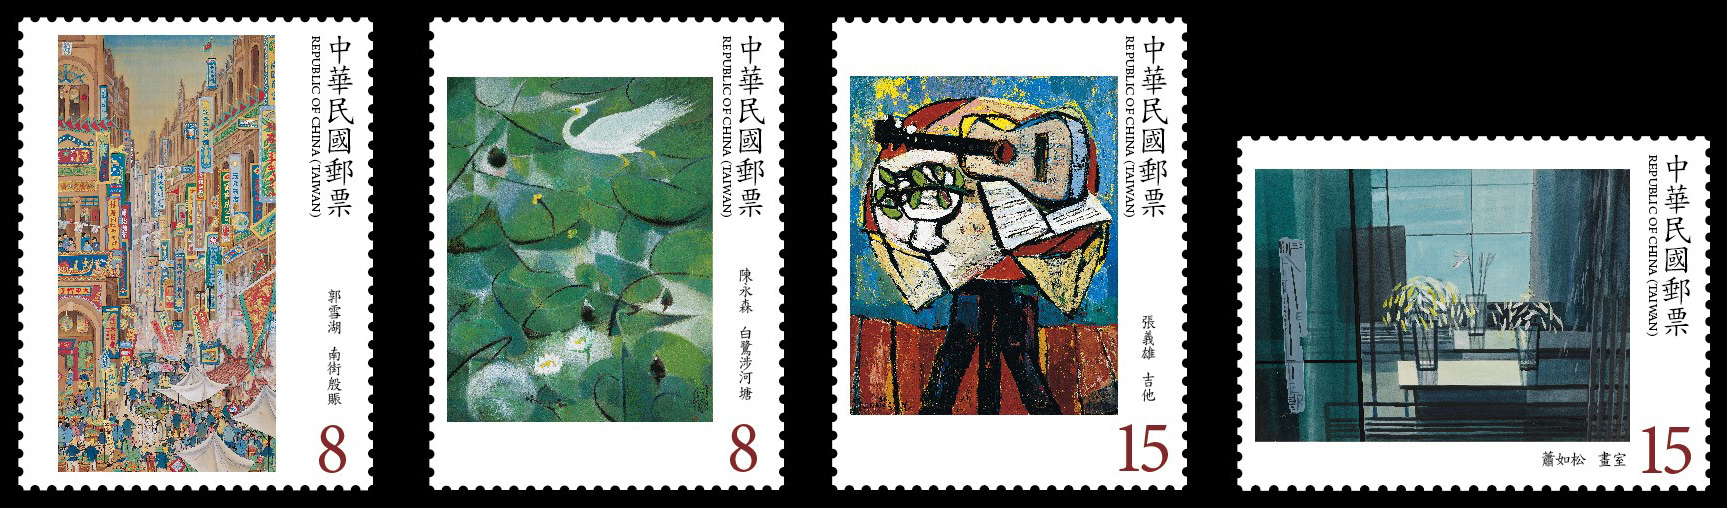 Modern Taiwanese Paintings Postage Stamps (Issue of 2019)